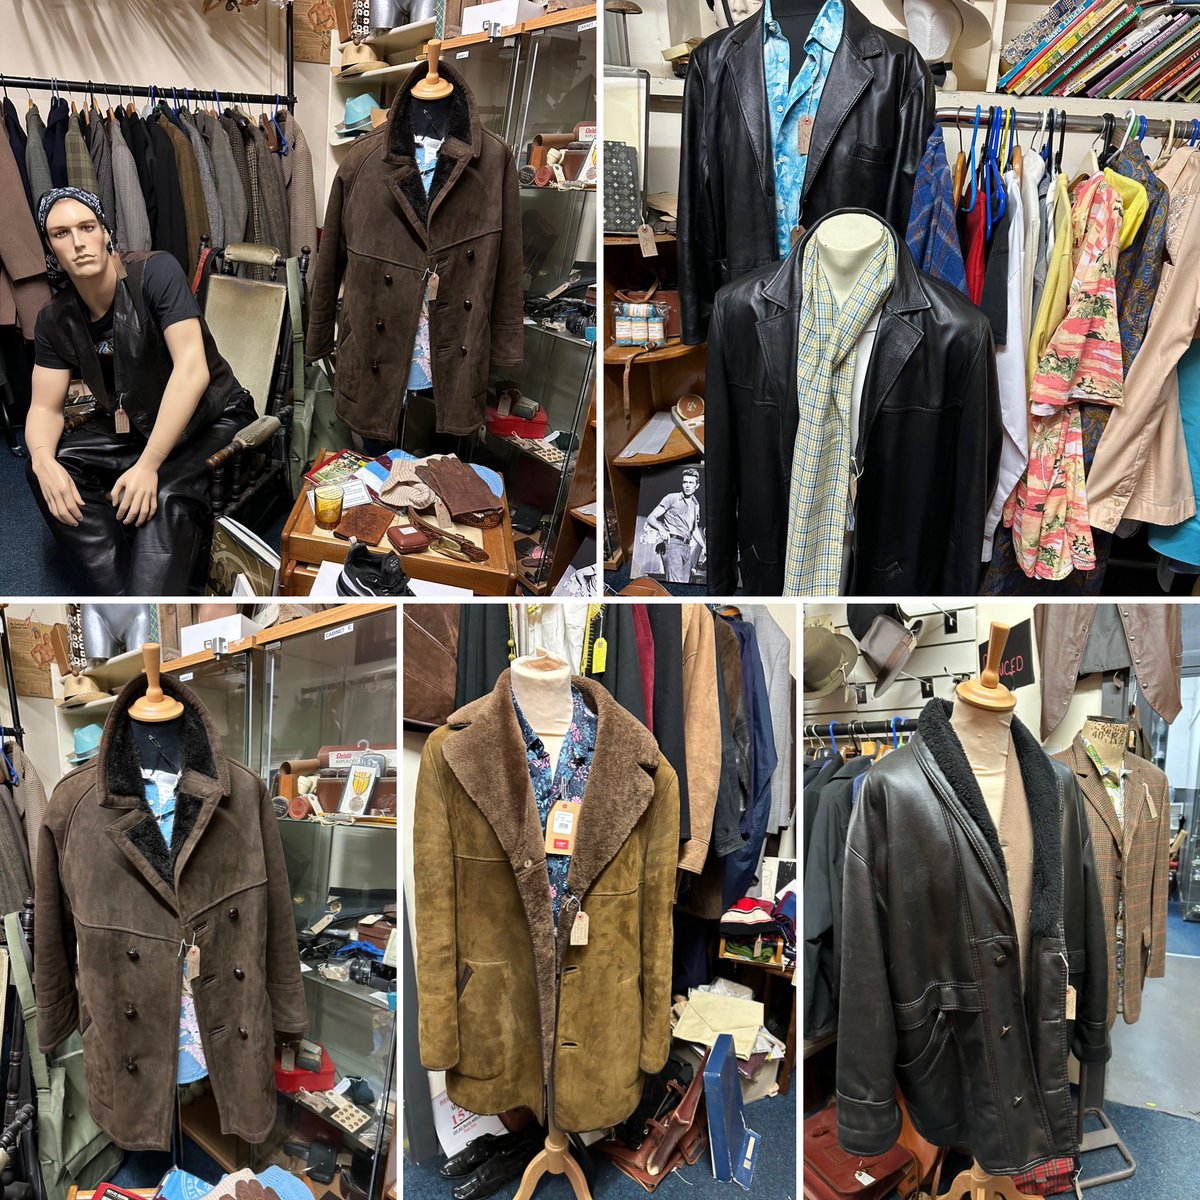 If you’re looking for a new jacket then look no further than unit 32 who has a wide range of men’s and women’s vintage and retro clothing and accessories. #mensvintageclothing #vintagejackets #vintageclothing #vintageaccessories #vintagegent #ladiesvintageclothing #astraantiques